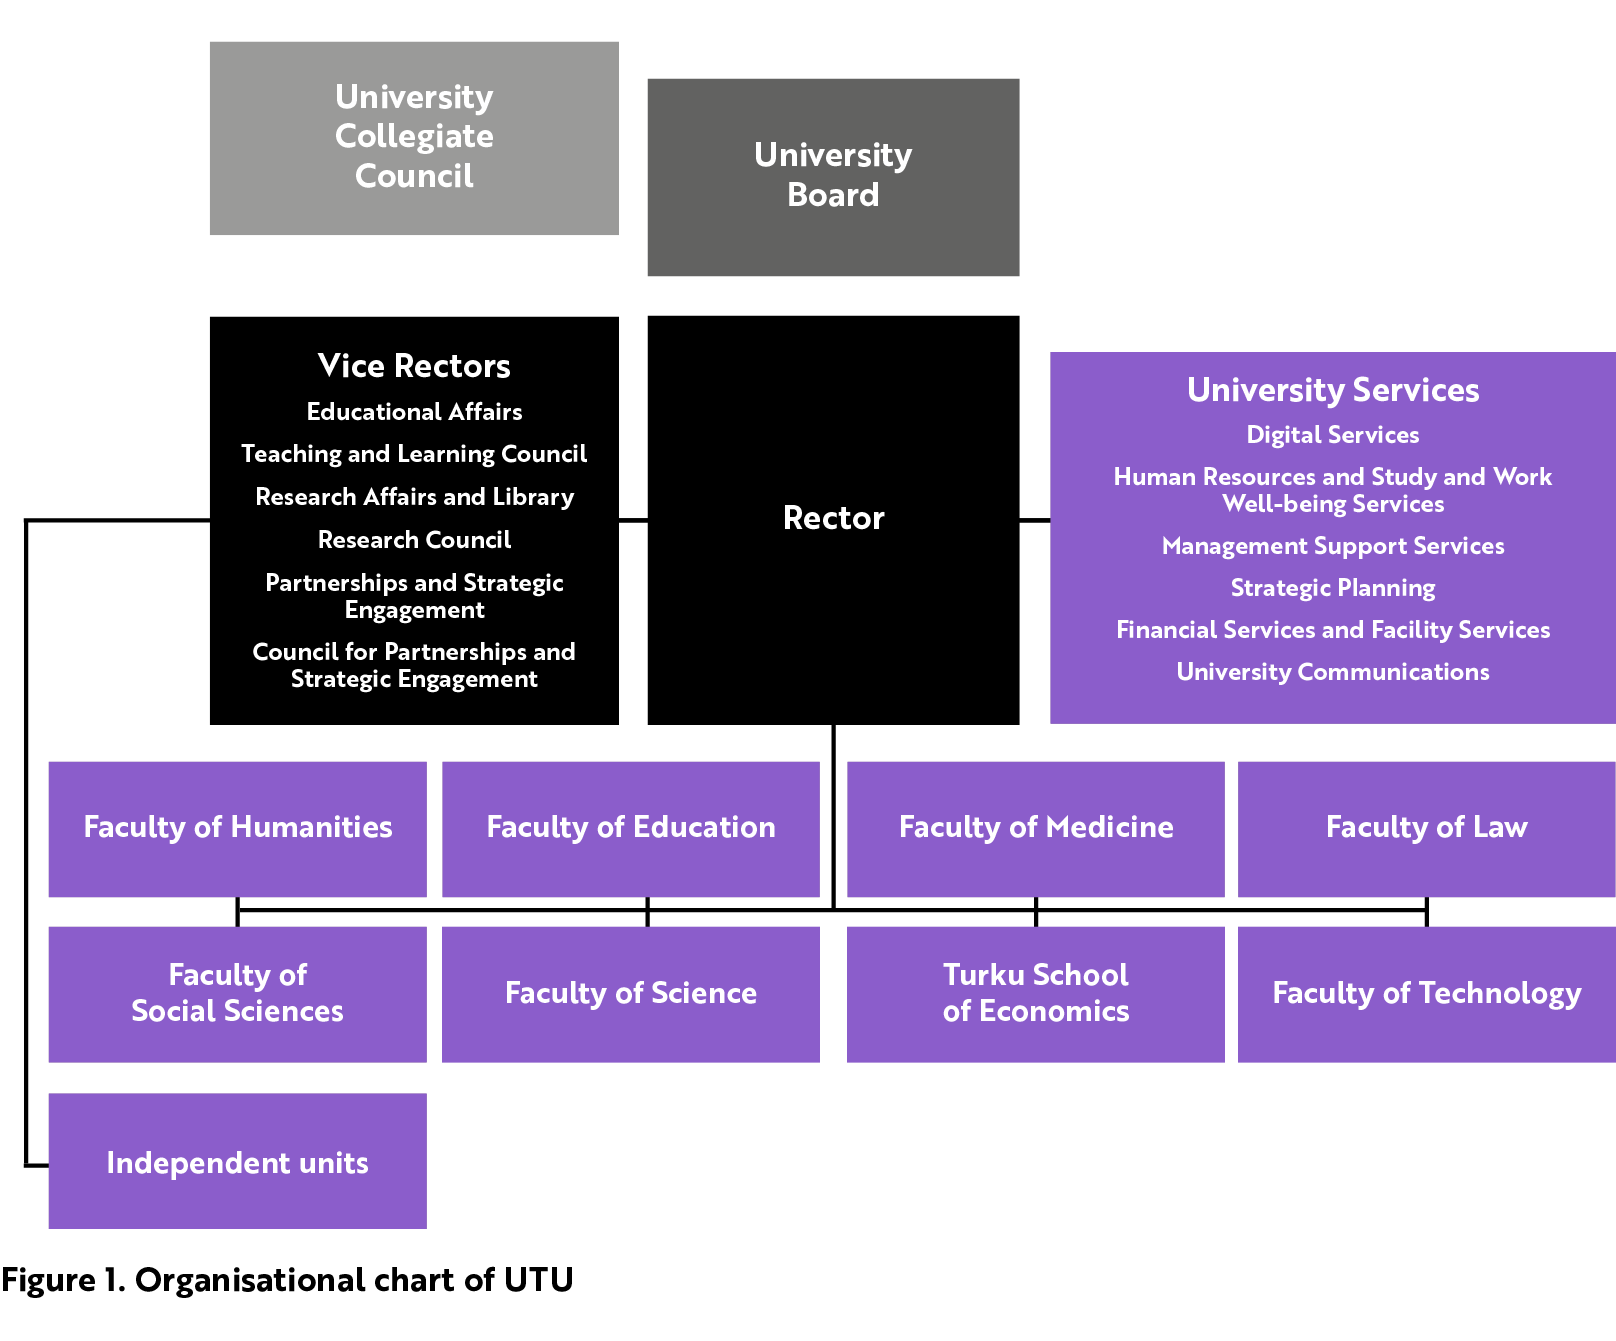 The central administration of UTU consists of the Board, the Rector and the Vice Rectors, the University Collegiate Council, services and areas of responsibility led by the Vice Rectors, and university services. The units under the lead of the vice rectors are educational affairs, research affairs and library and partnerships and strategic engagement. The chair of the teaching and learning council, research council and council for partnerships and strategic engagement is the corresponding vice rector. The university services include digital services, human resources and study and work well-being services, management support services, strategic planning, financial services and facility services, and university communications. The eight faculties of UTU are faculty of humanities, faculty of education, faculty of medicine, faculty of law, faculty of social sciences, faculty of science, Turku School of Economics and faculty of technology. UTU also has five independent units.